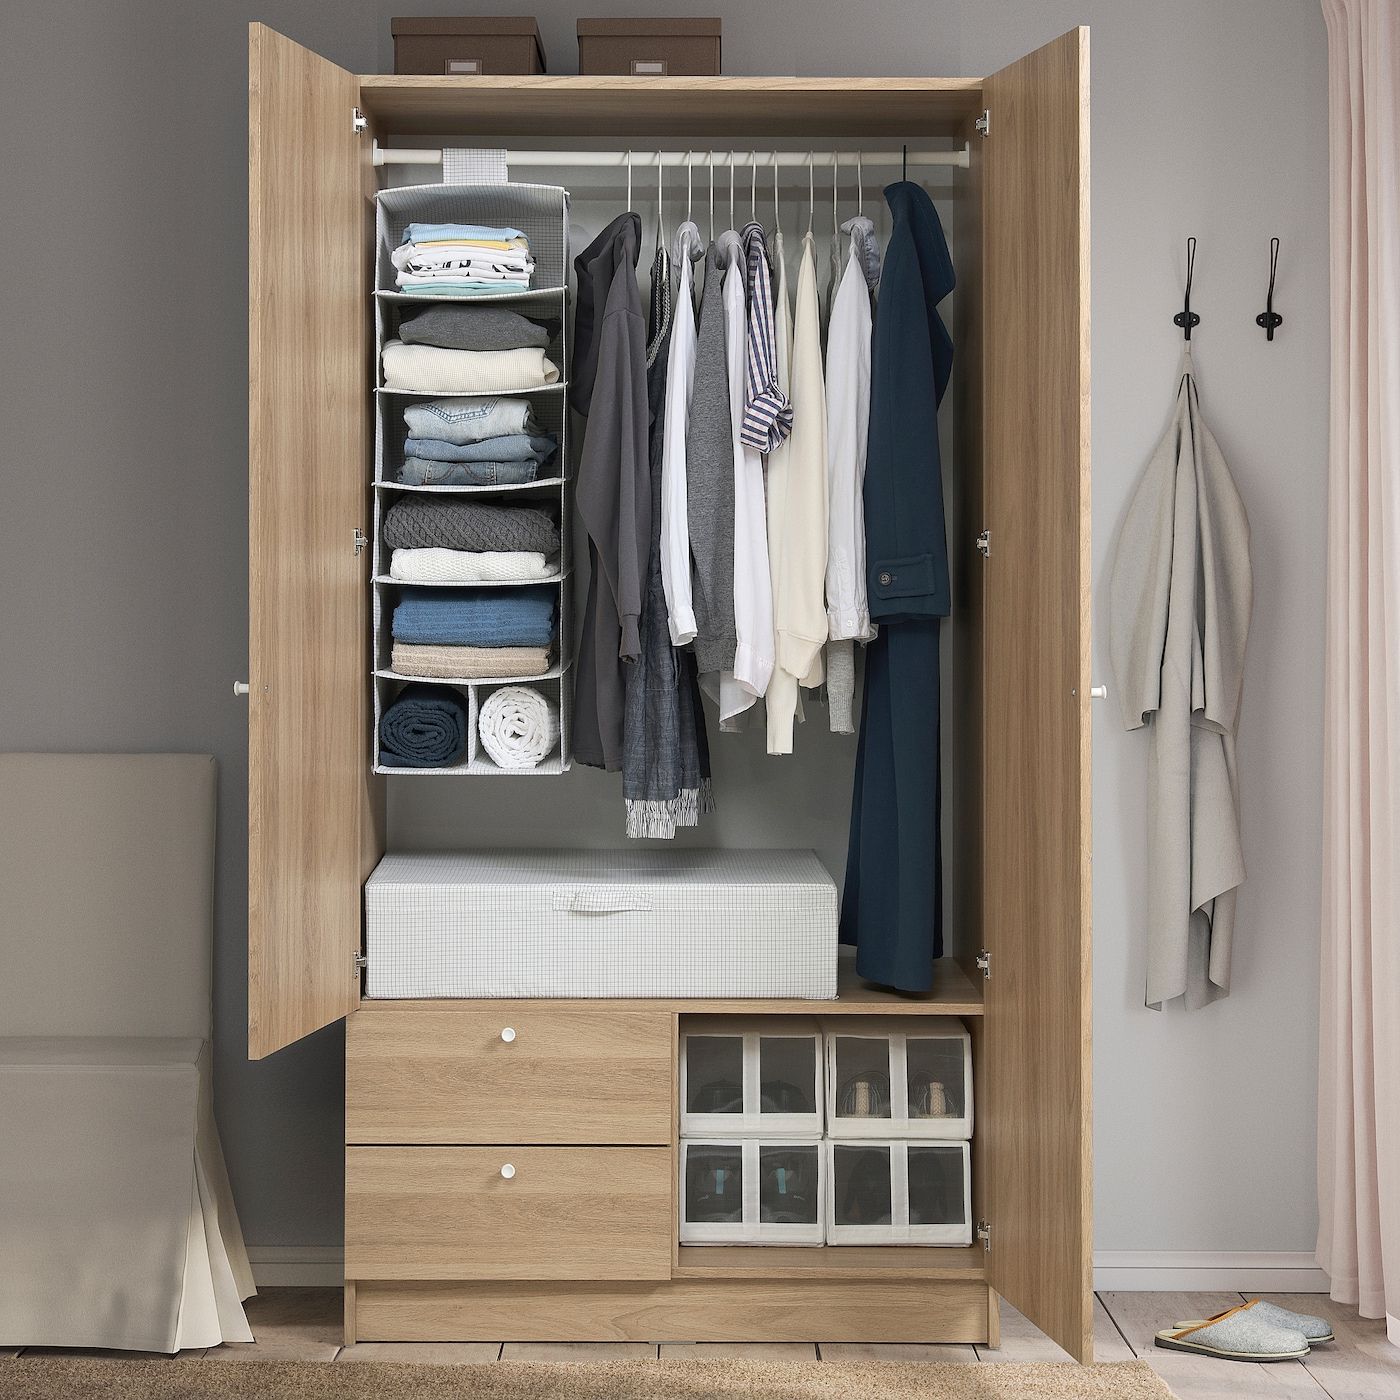 2018 Vilhatten Wardrobe With 2 Doors And 2 Drawers, Oak Effect – Ikea Inside Wardrobes With Two Drawers (View 4 of 10)